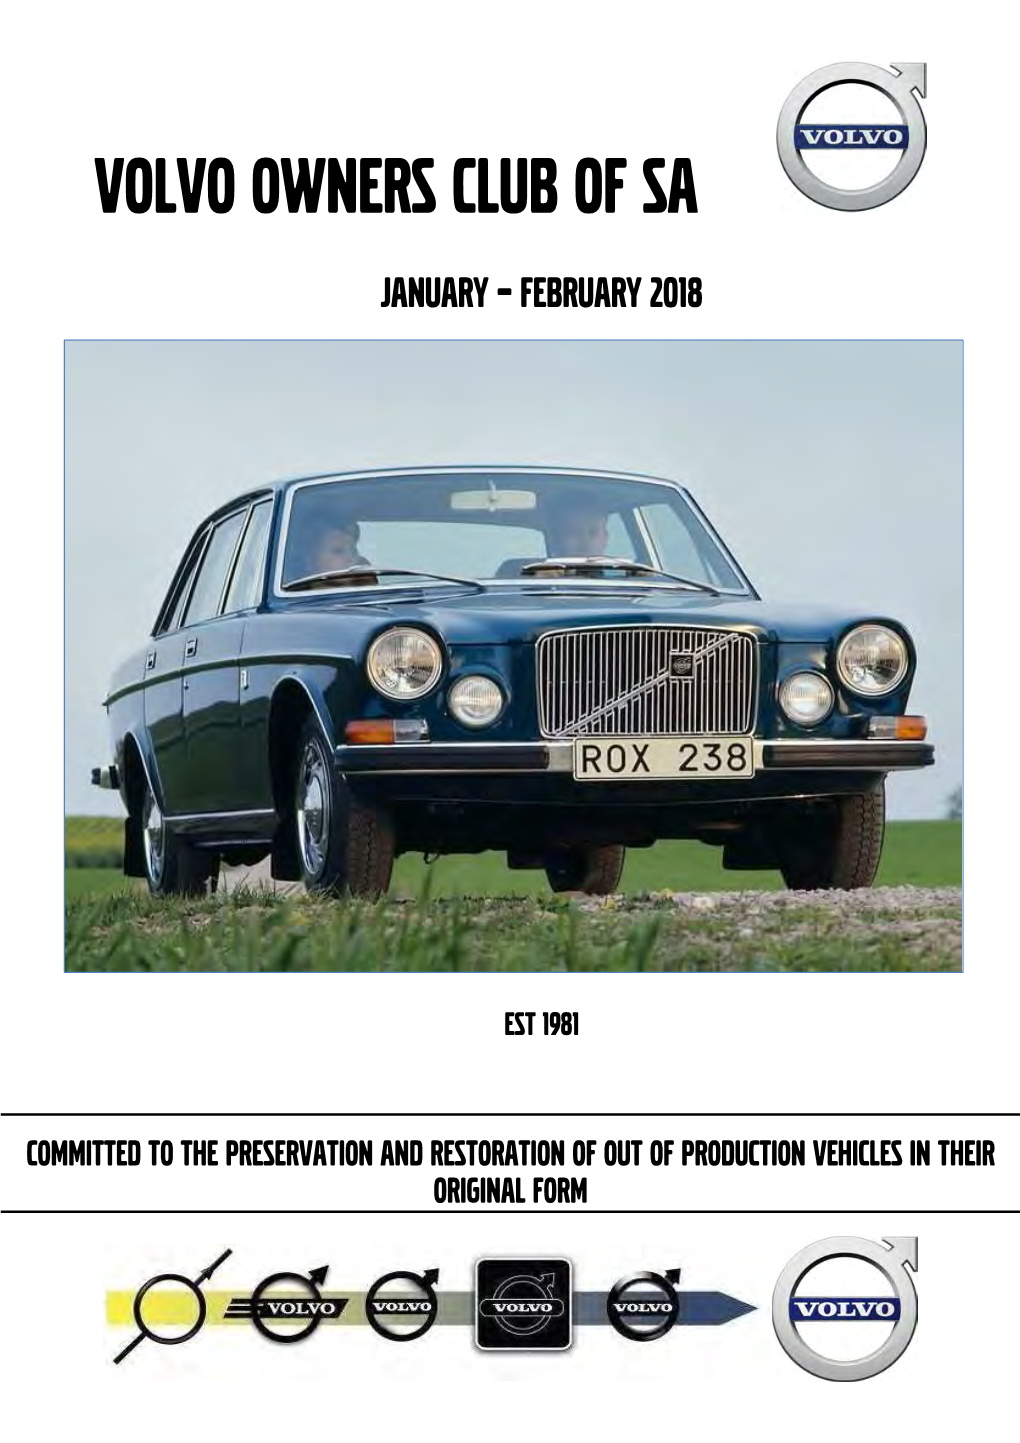 Volvo Owners Club of SA